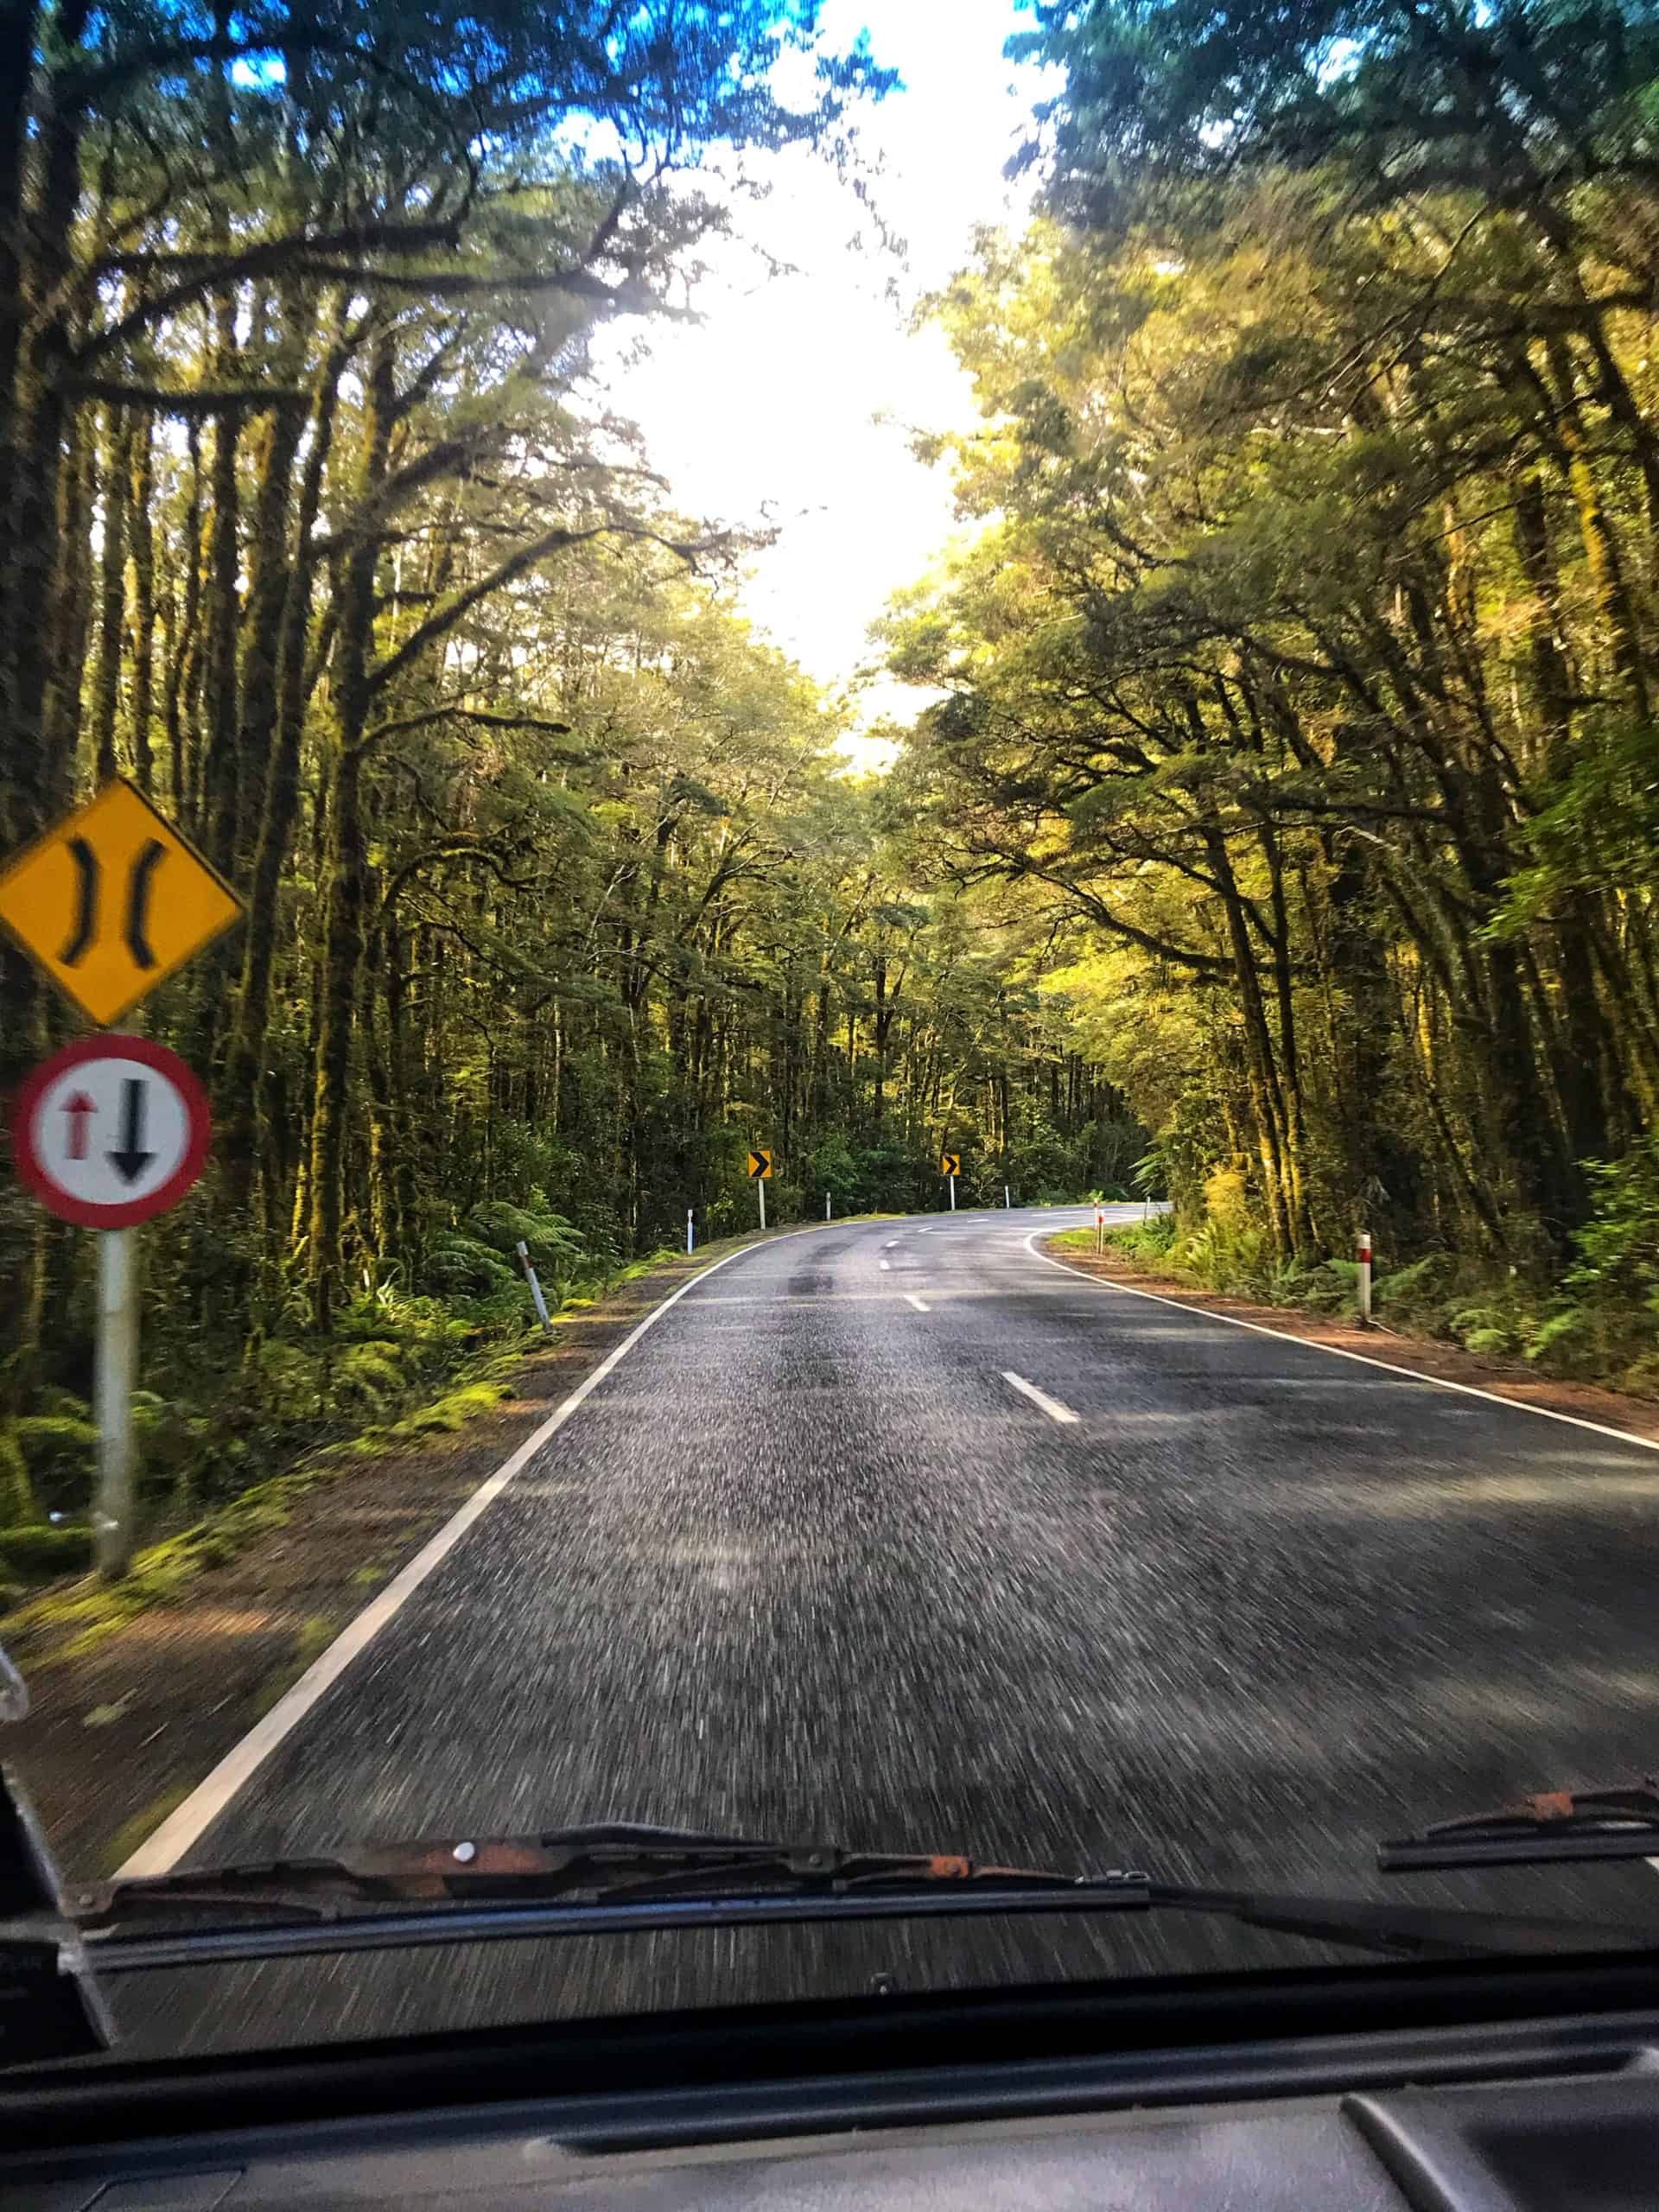 Coming up to a one lane bridge in New Zealand